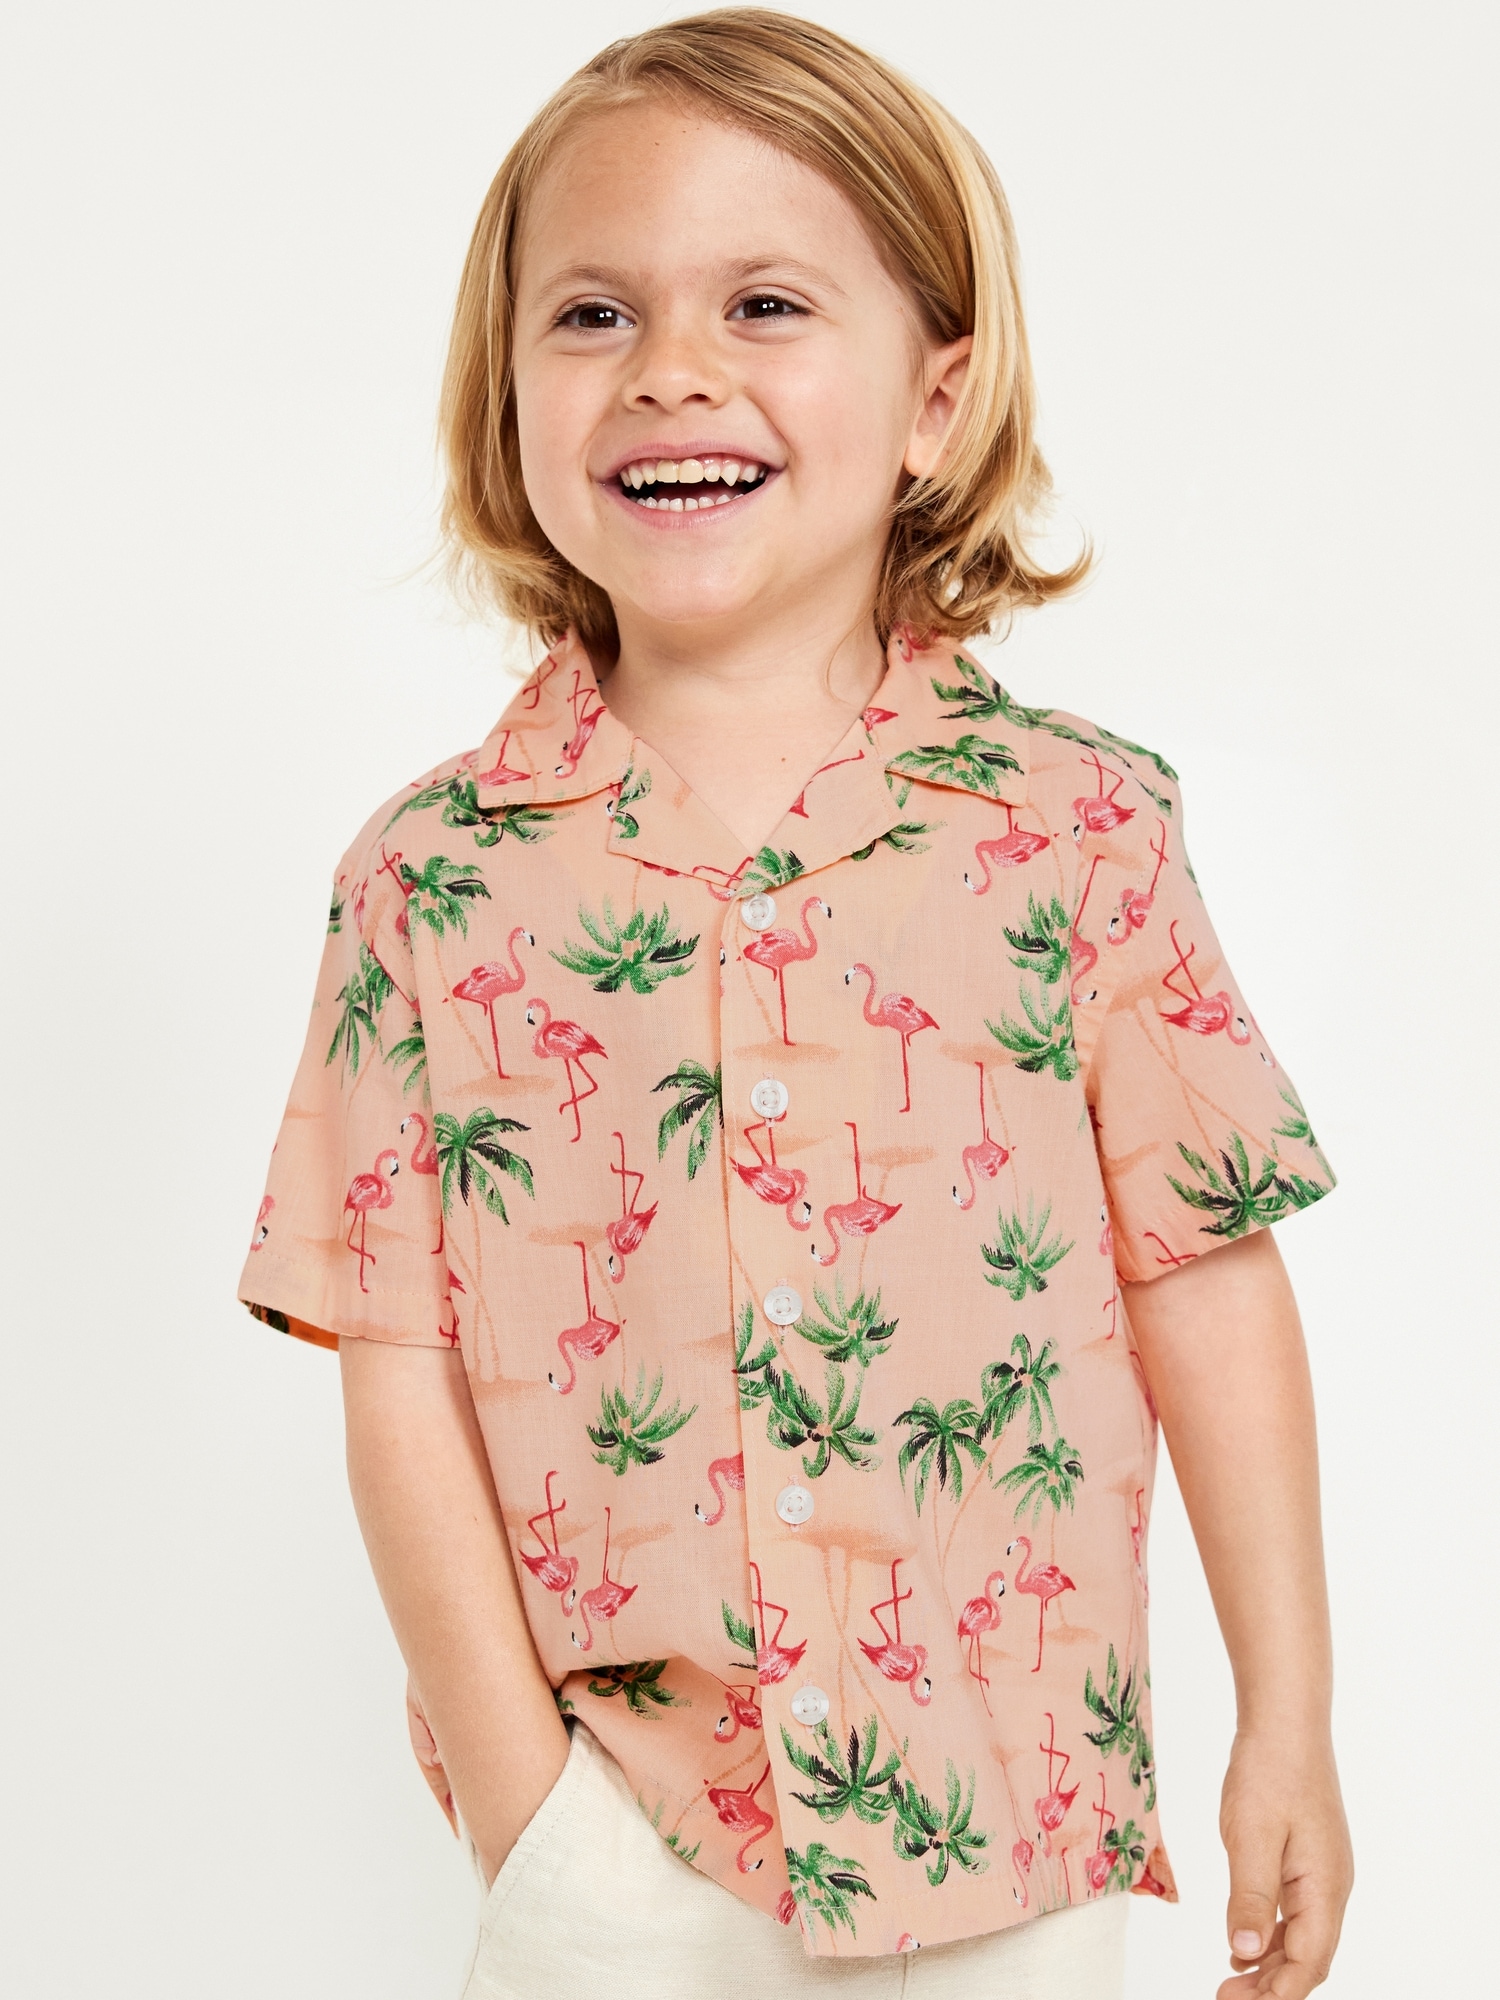 Matching Printed Short-Sleeve Camp Shirt for Toddler Boys Hot Deal